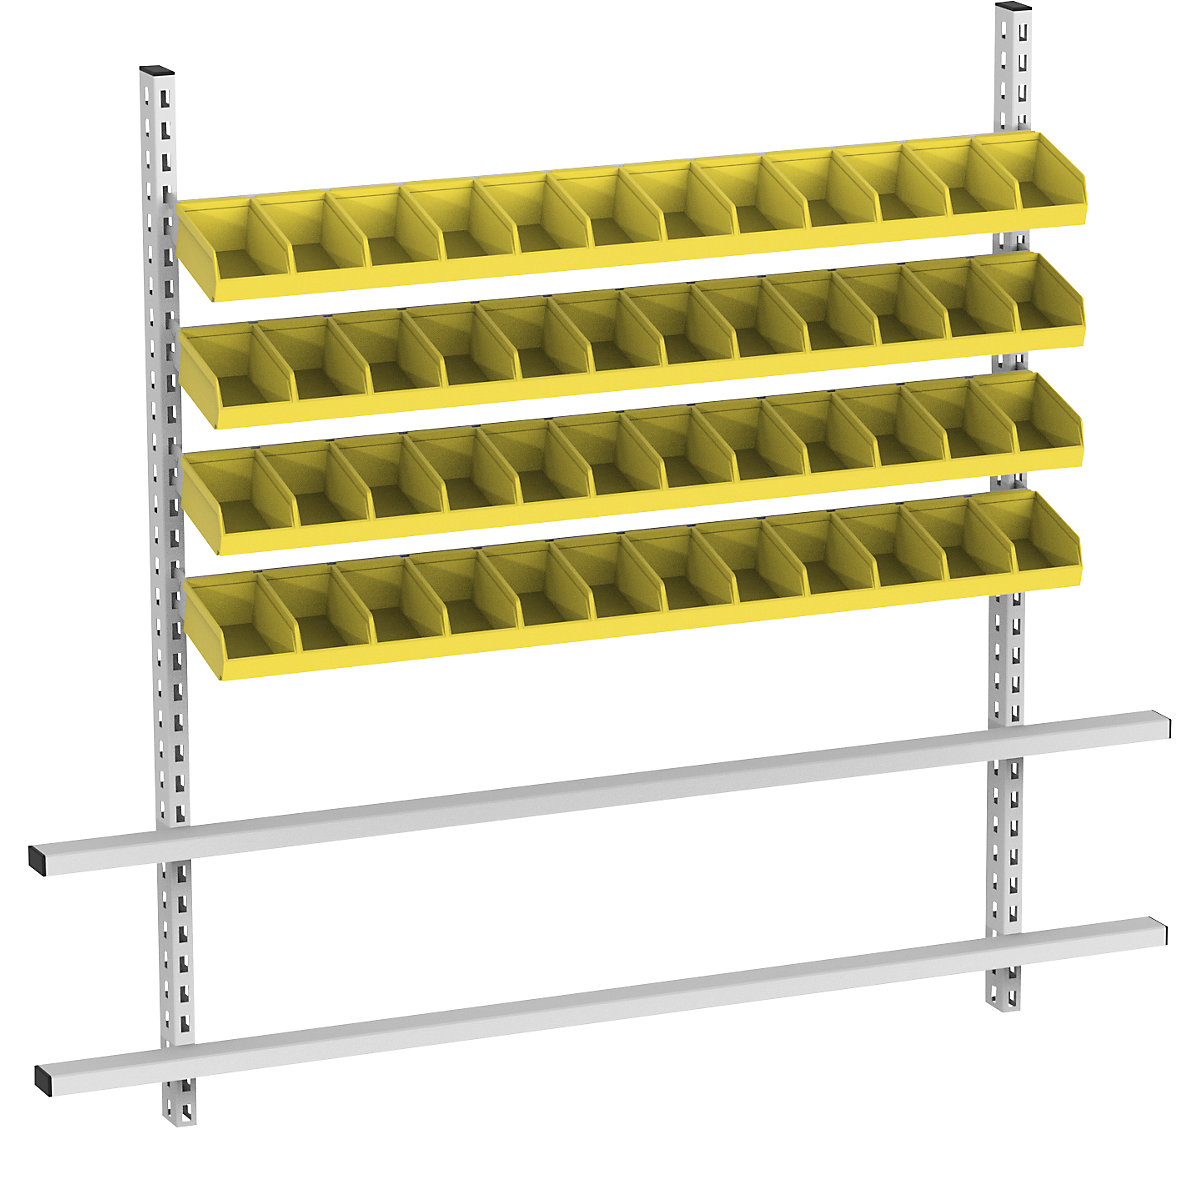 Add-on for table with open fronted storage bins, width 2030 mm, 4 rails with 48 boxes, bins in yellow-2